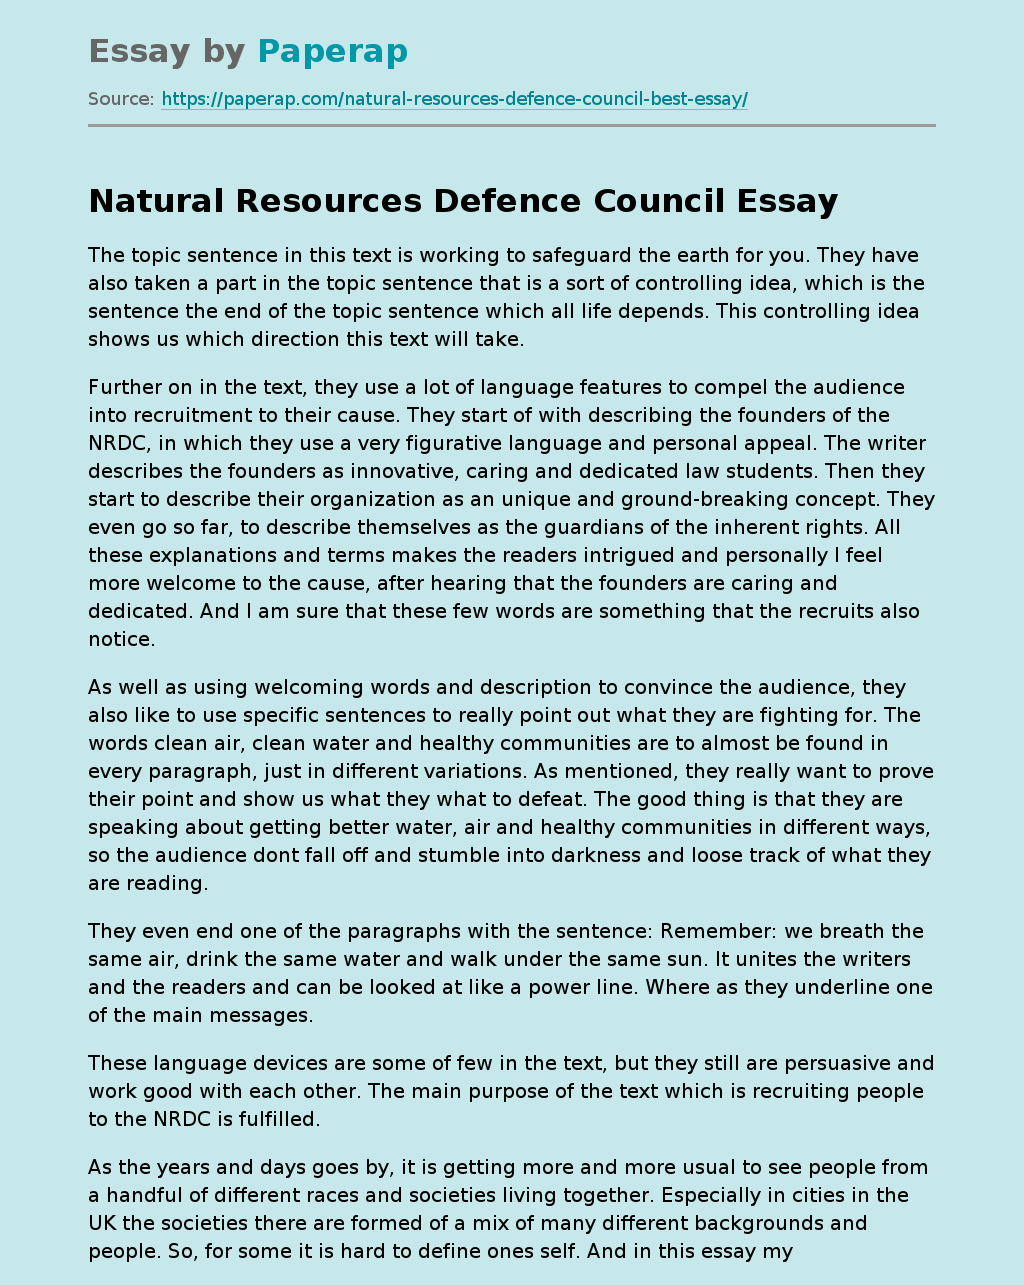 Natural Resources Defence Council